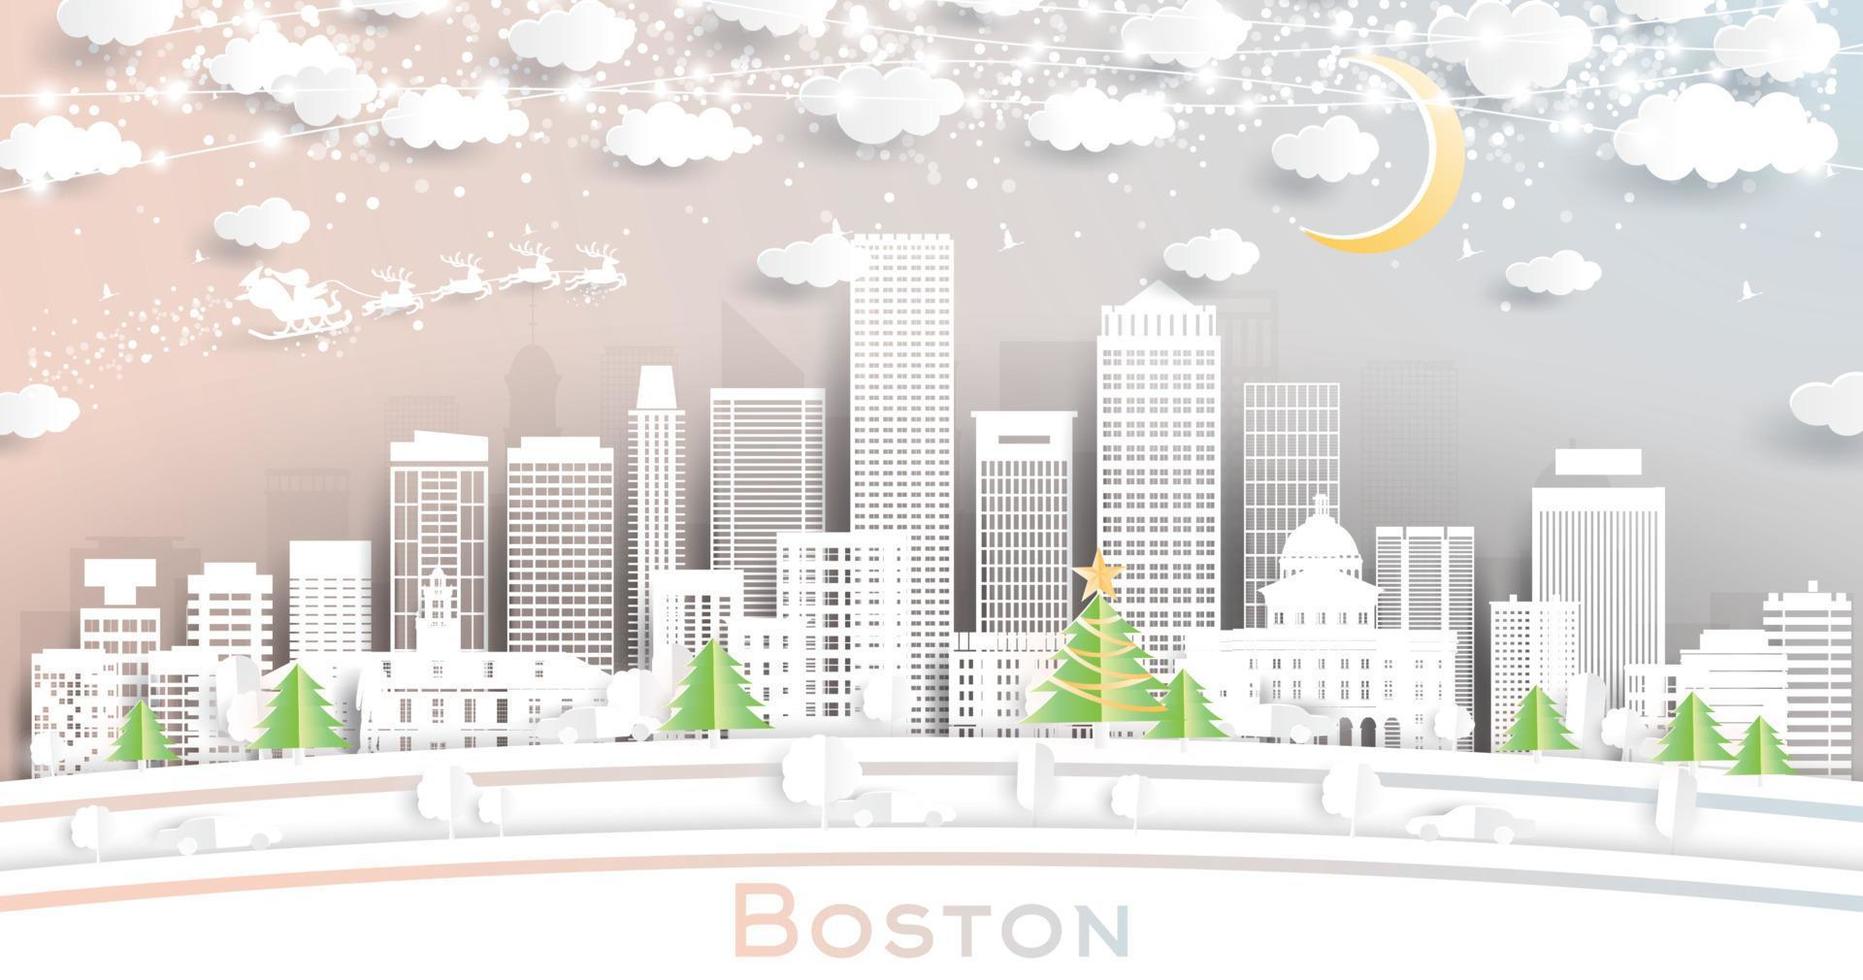 Boston Massachusetts USA City Skyline in Paper Cut Style with Snowflakes, Moon and Neon Garland. vector